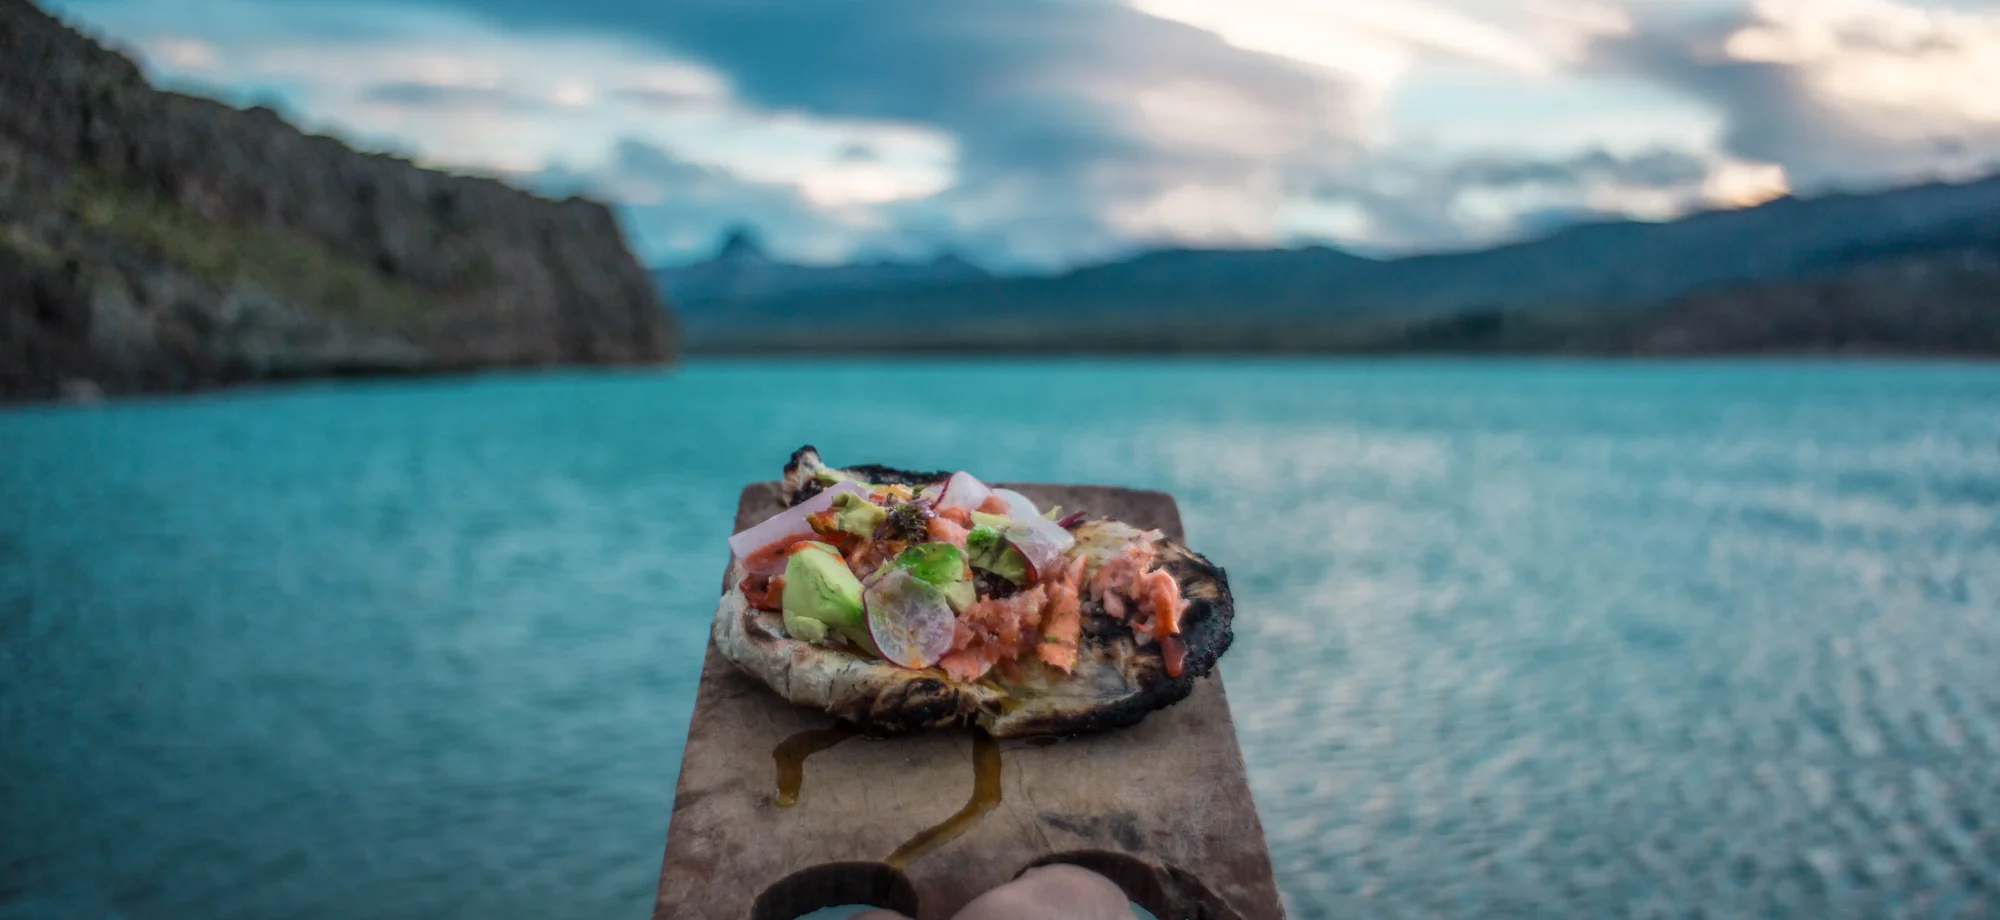 Someone is holding a delicious traditional dish, served on a slab of wood, ahead of a stunning scene of Lago Argentino.